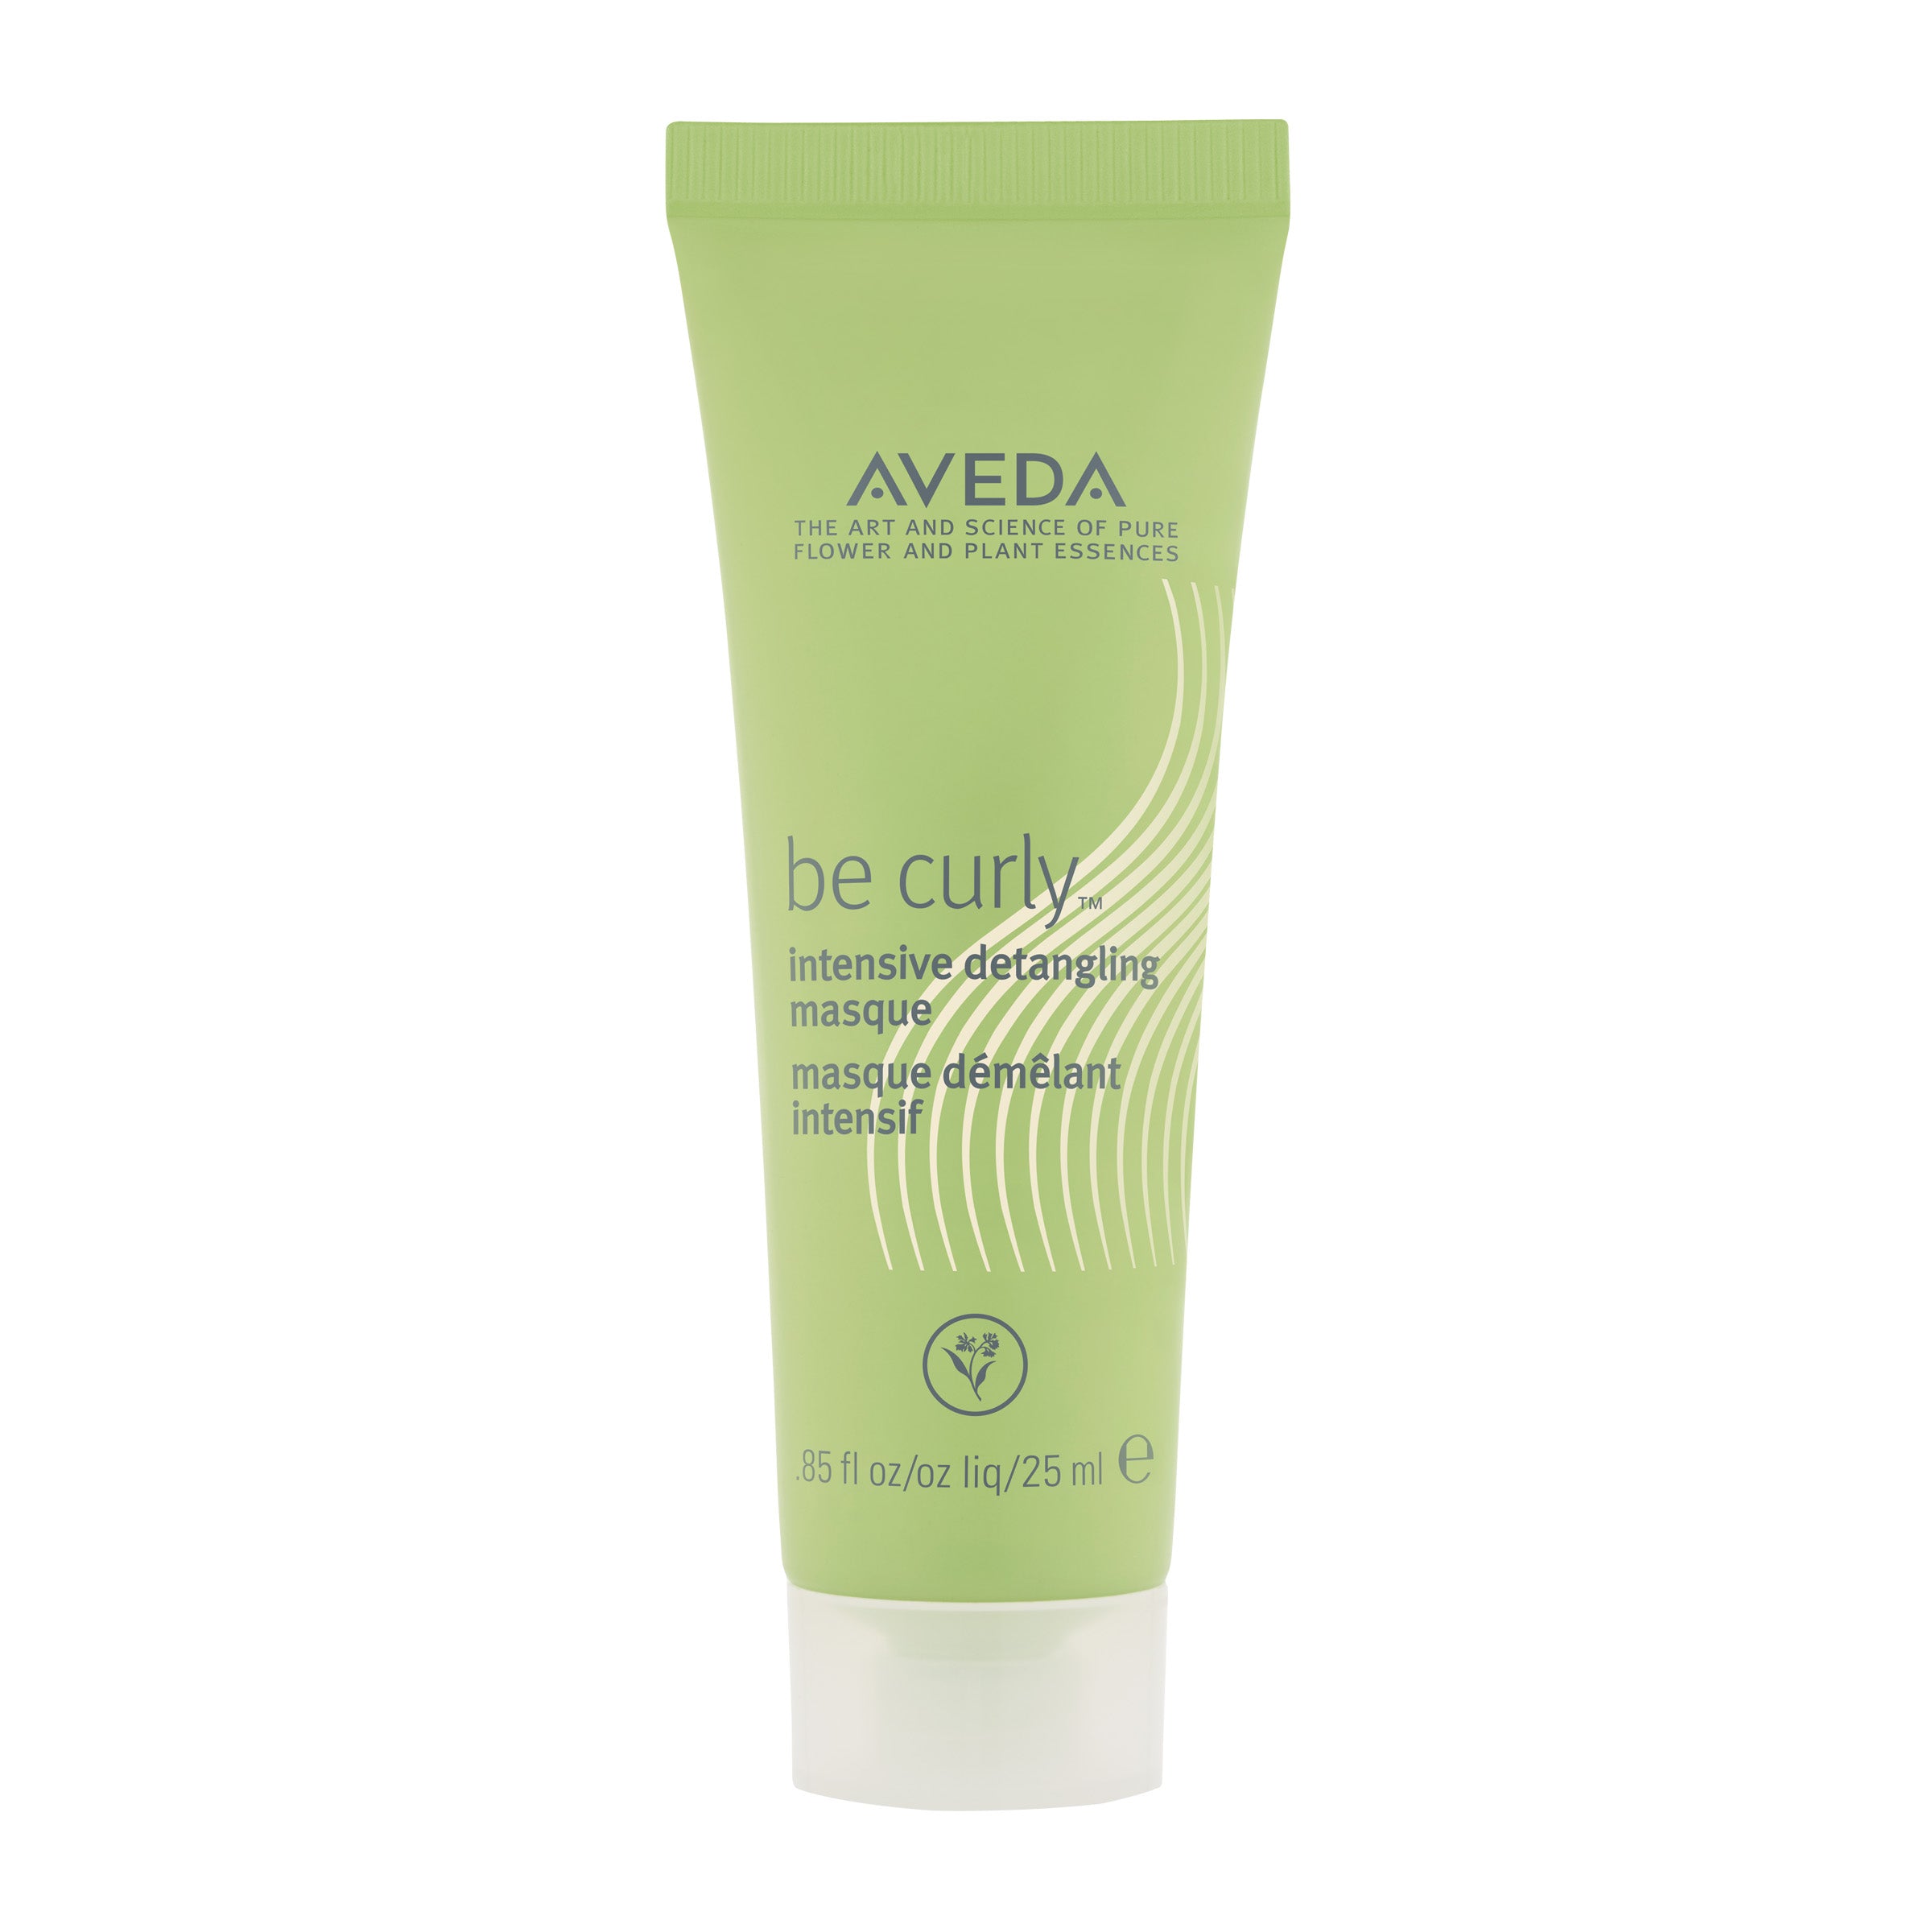 aveda be curly™ intensive detangling masque - travel size